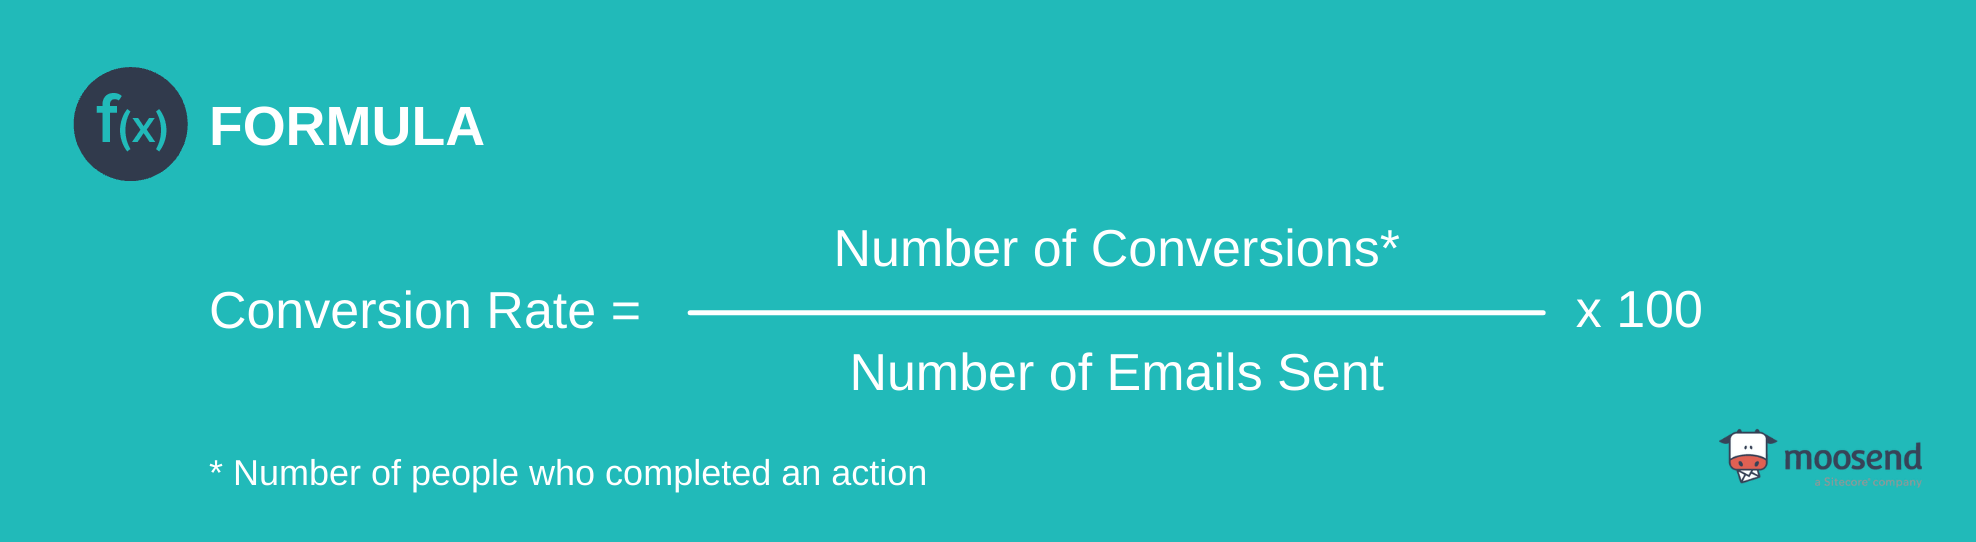 email conversion rate 